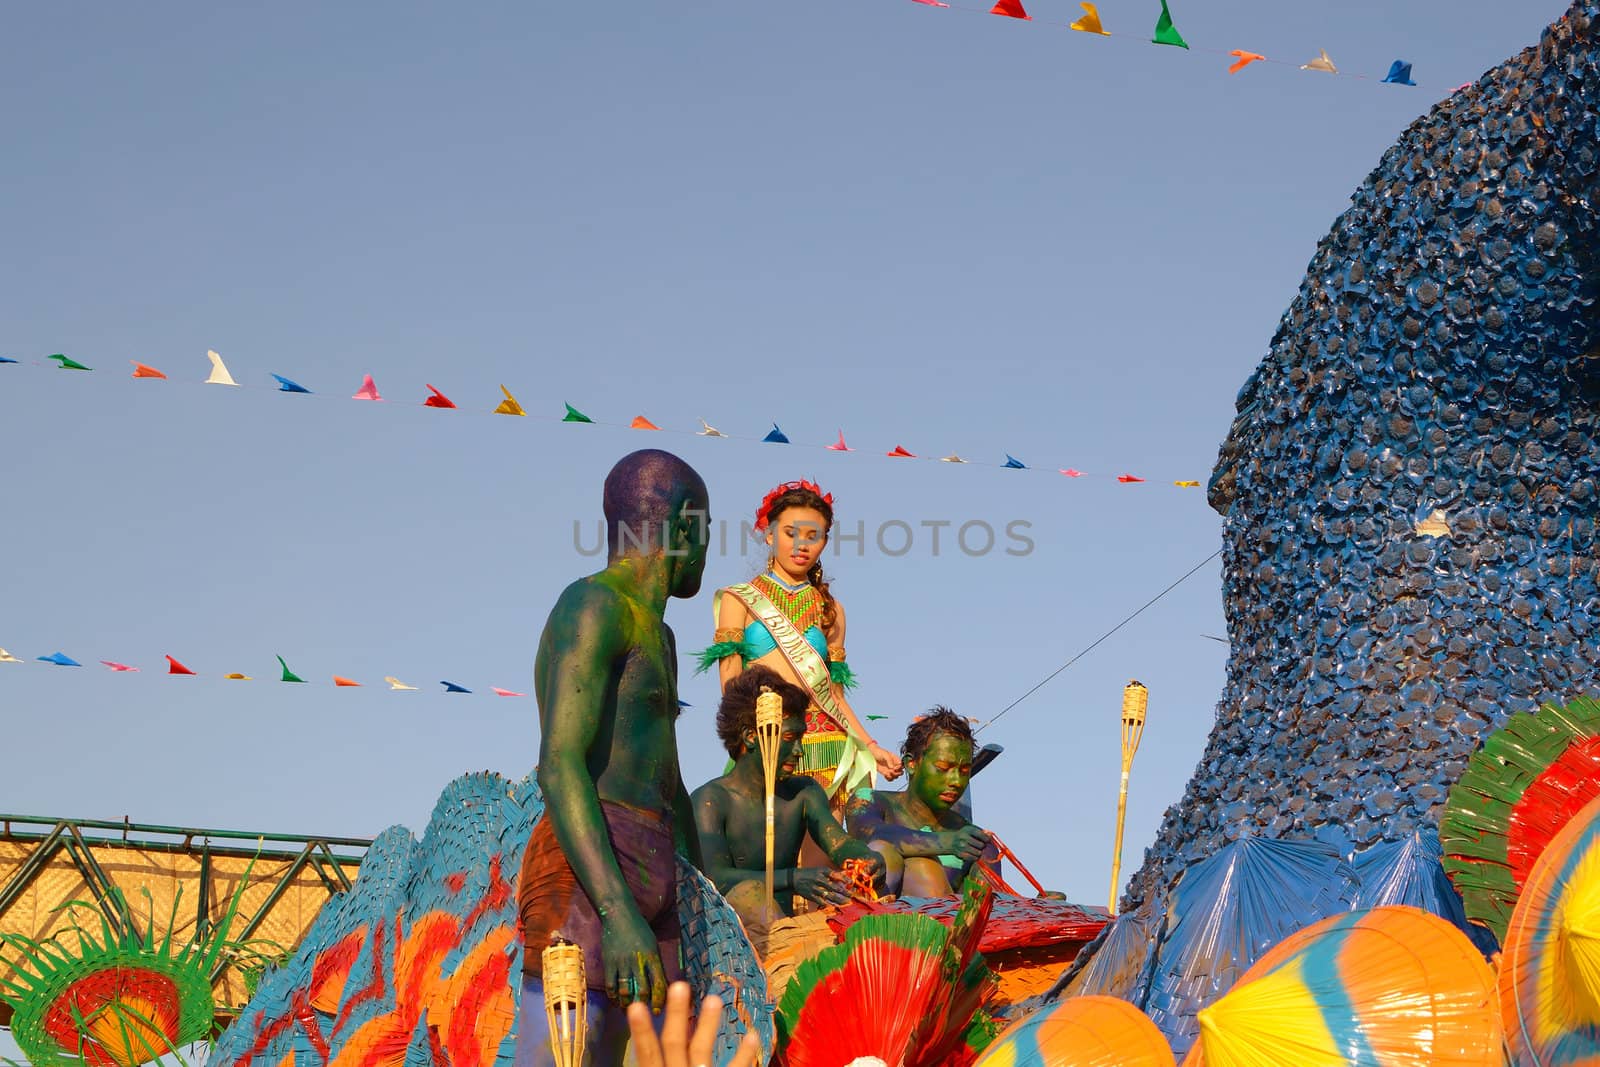 MANILA, PHILIPPINES - APR. 14: parade contestant in her cultural dress on bird float during Aliwan Fiesta, which is the biggest national festival competition on April 14, 2012 in Manila Philippines.